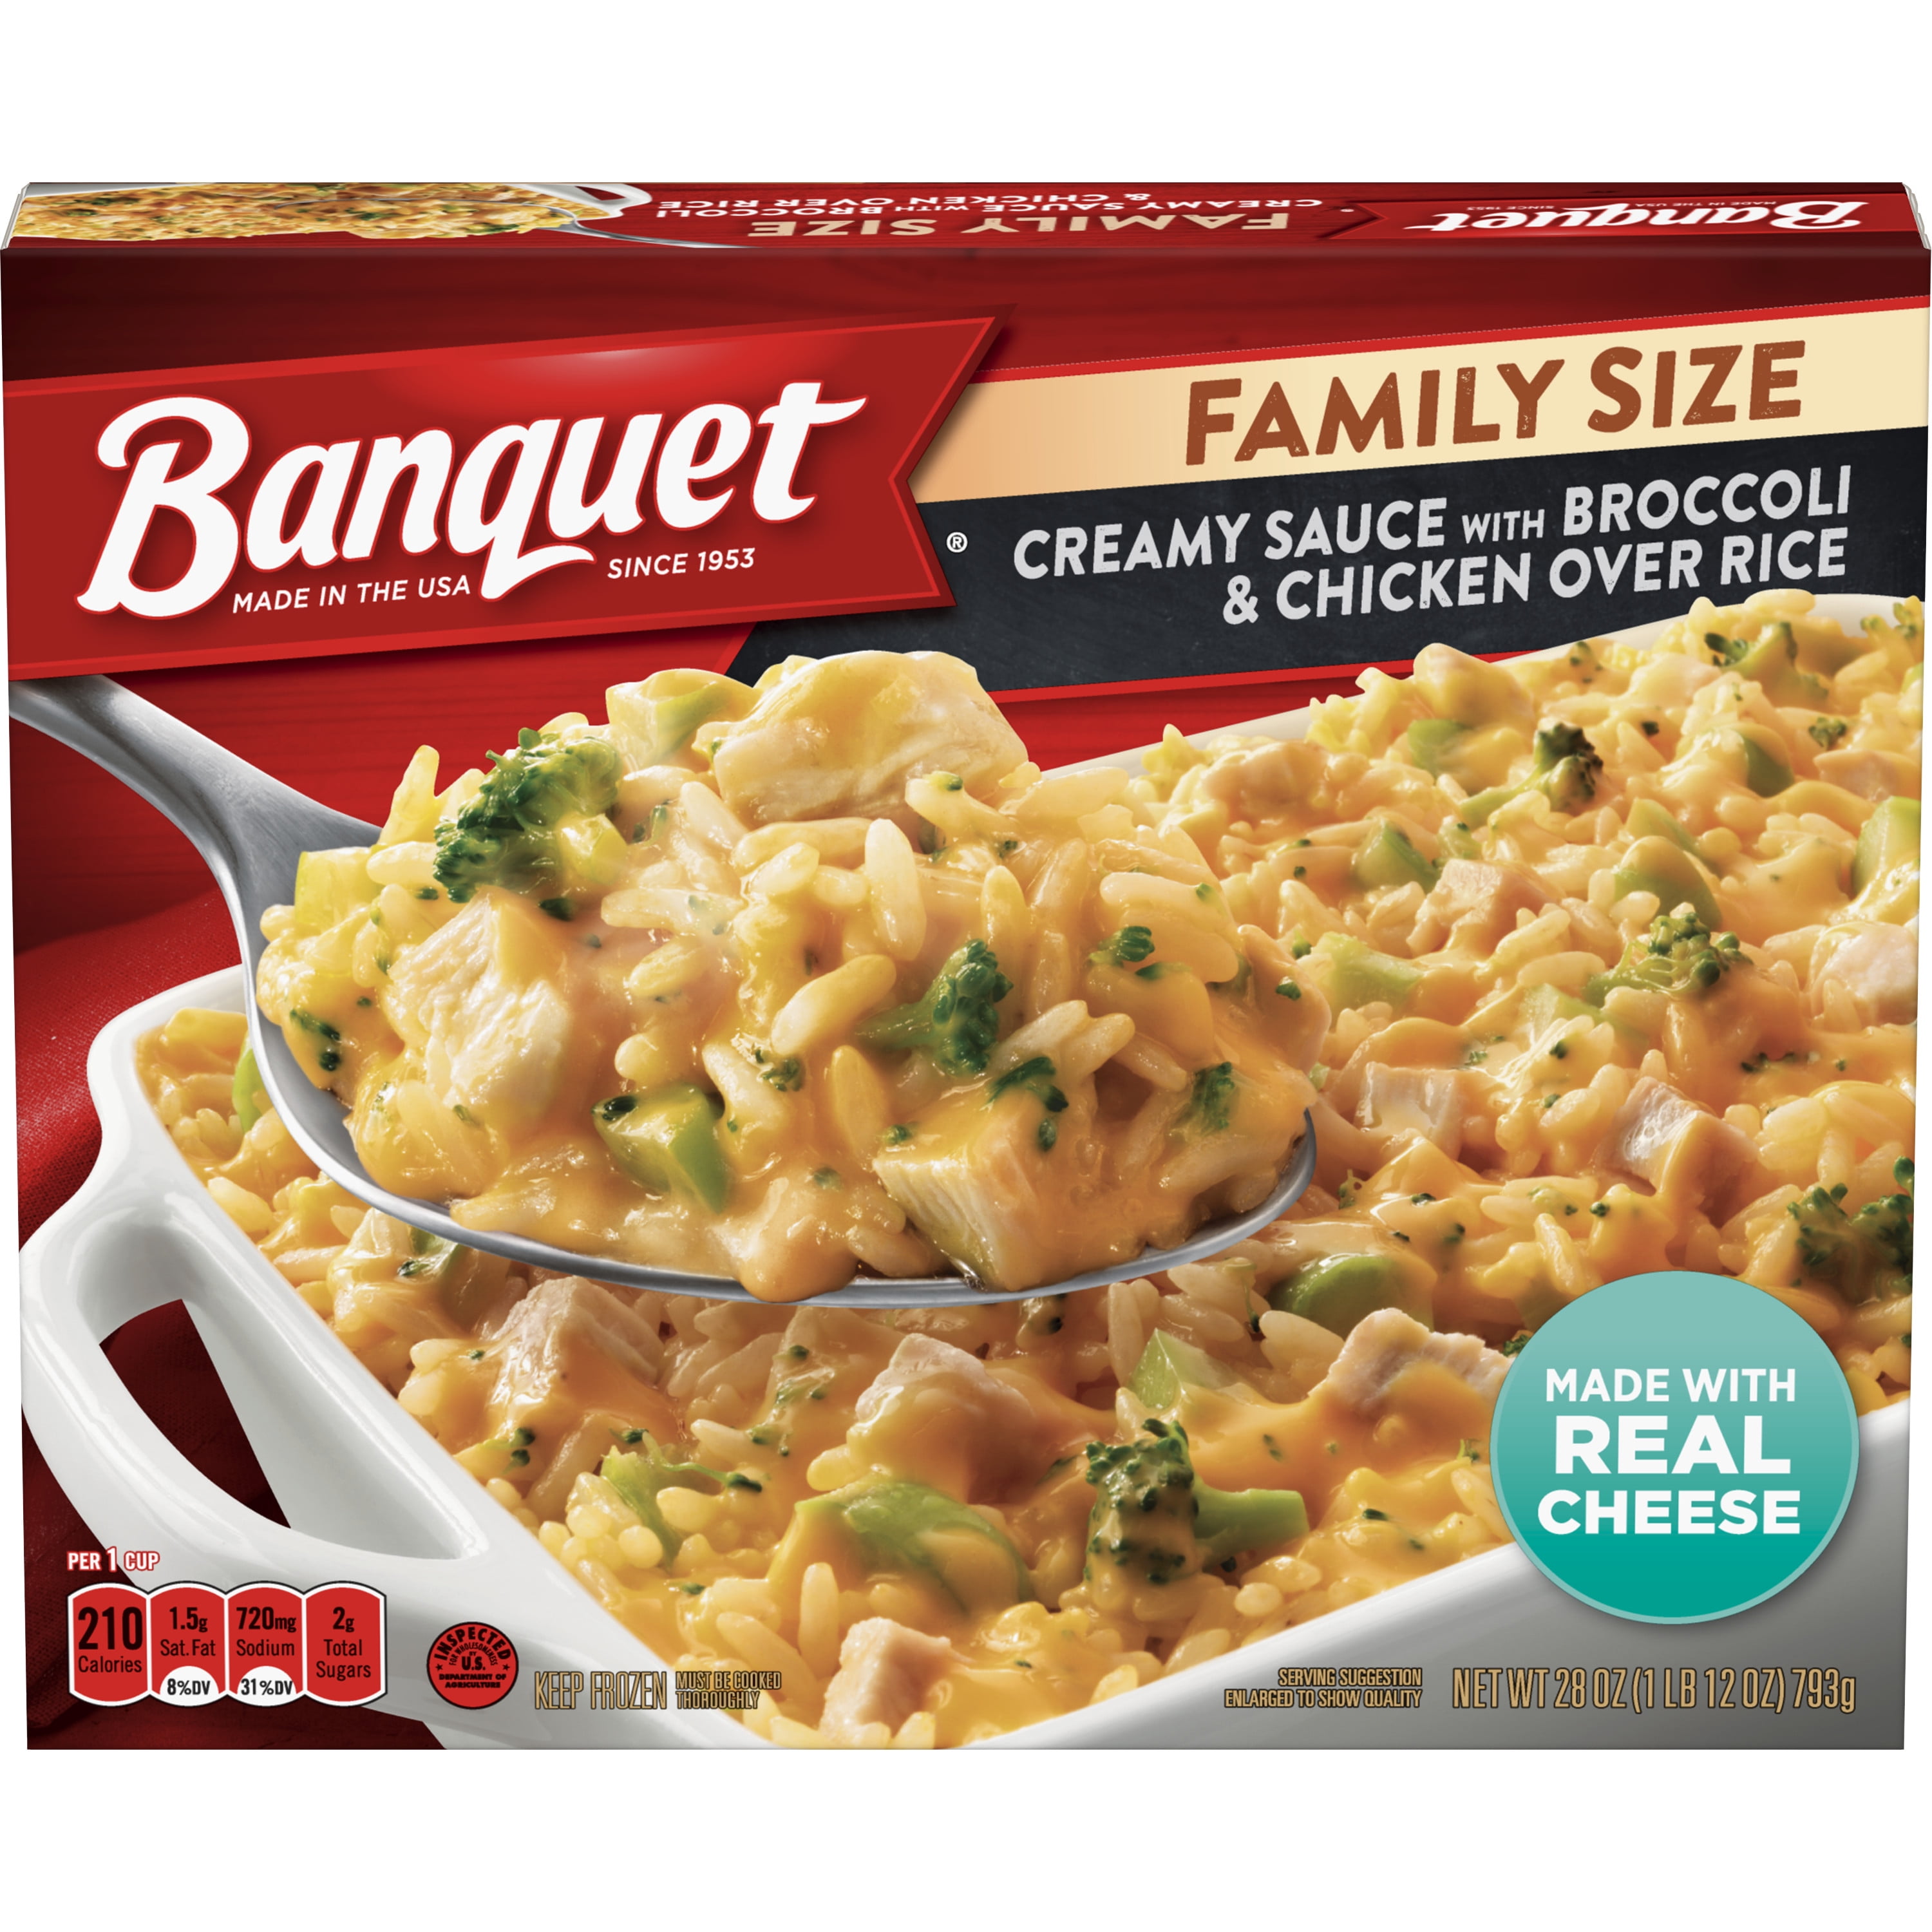 Banquet Family Size Creamy Sauce with Broccoli and Chicken Over Rice ...